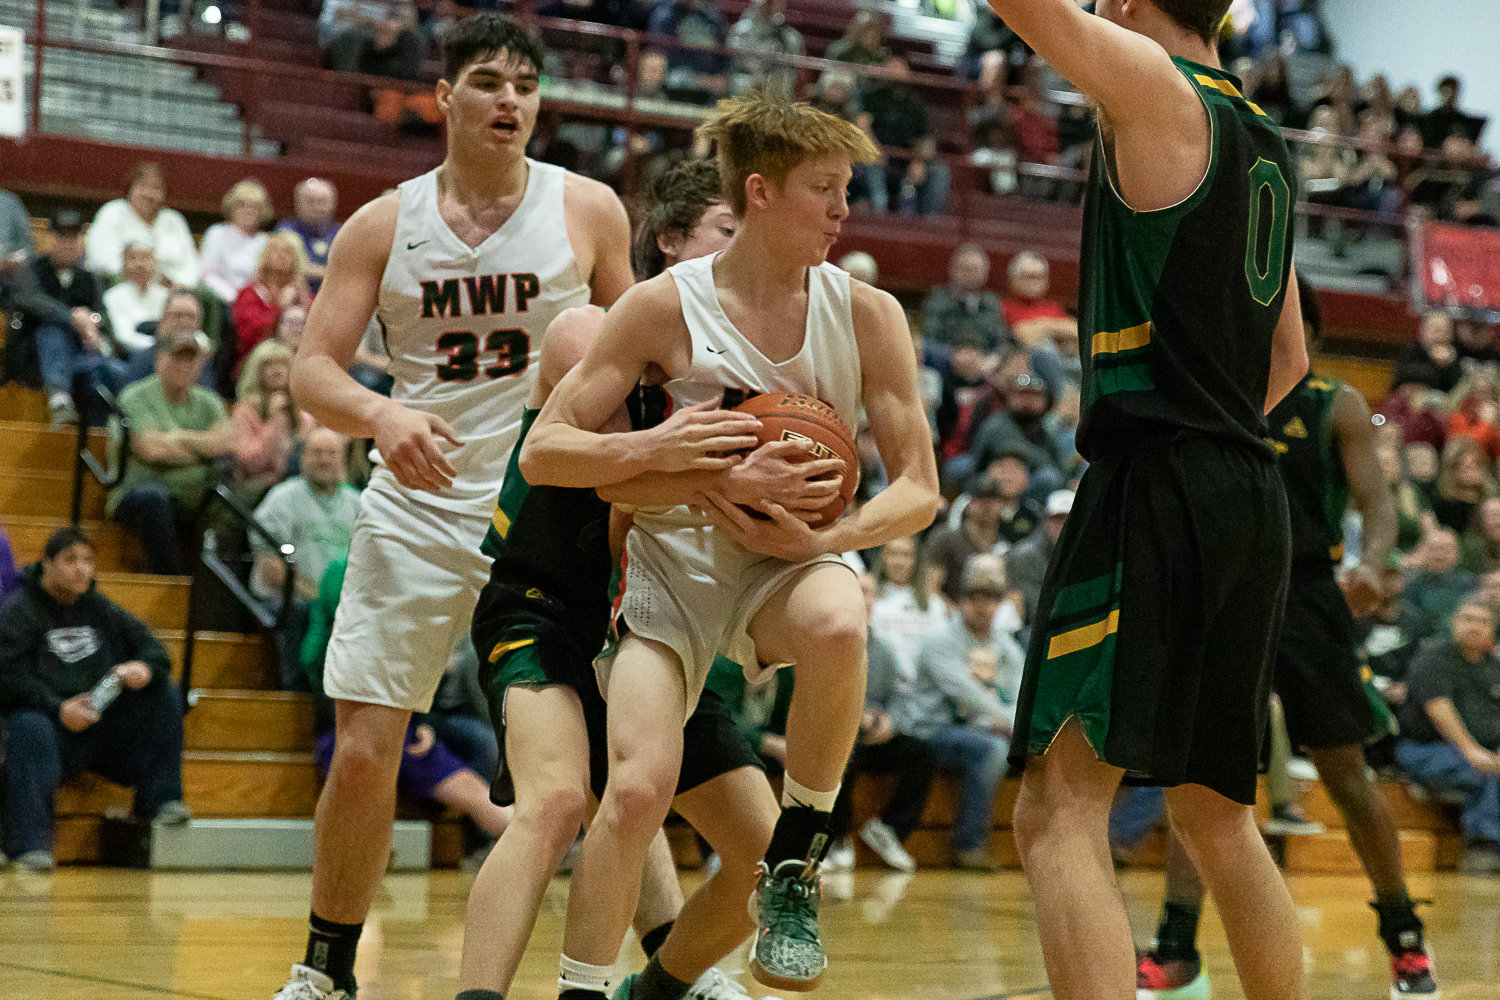 Morton-White Pass guard Jake Cournyer is bear-hugged in an opening round of state matchup against Northwest Christian (Colbert) at W.F. West Feb. 25.